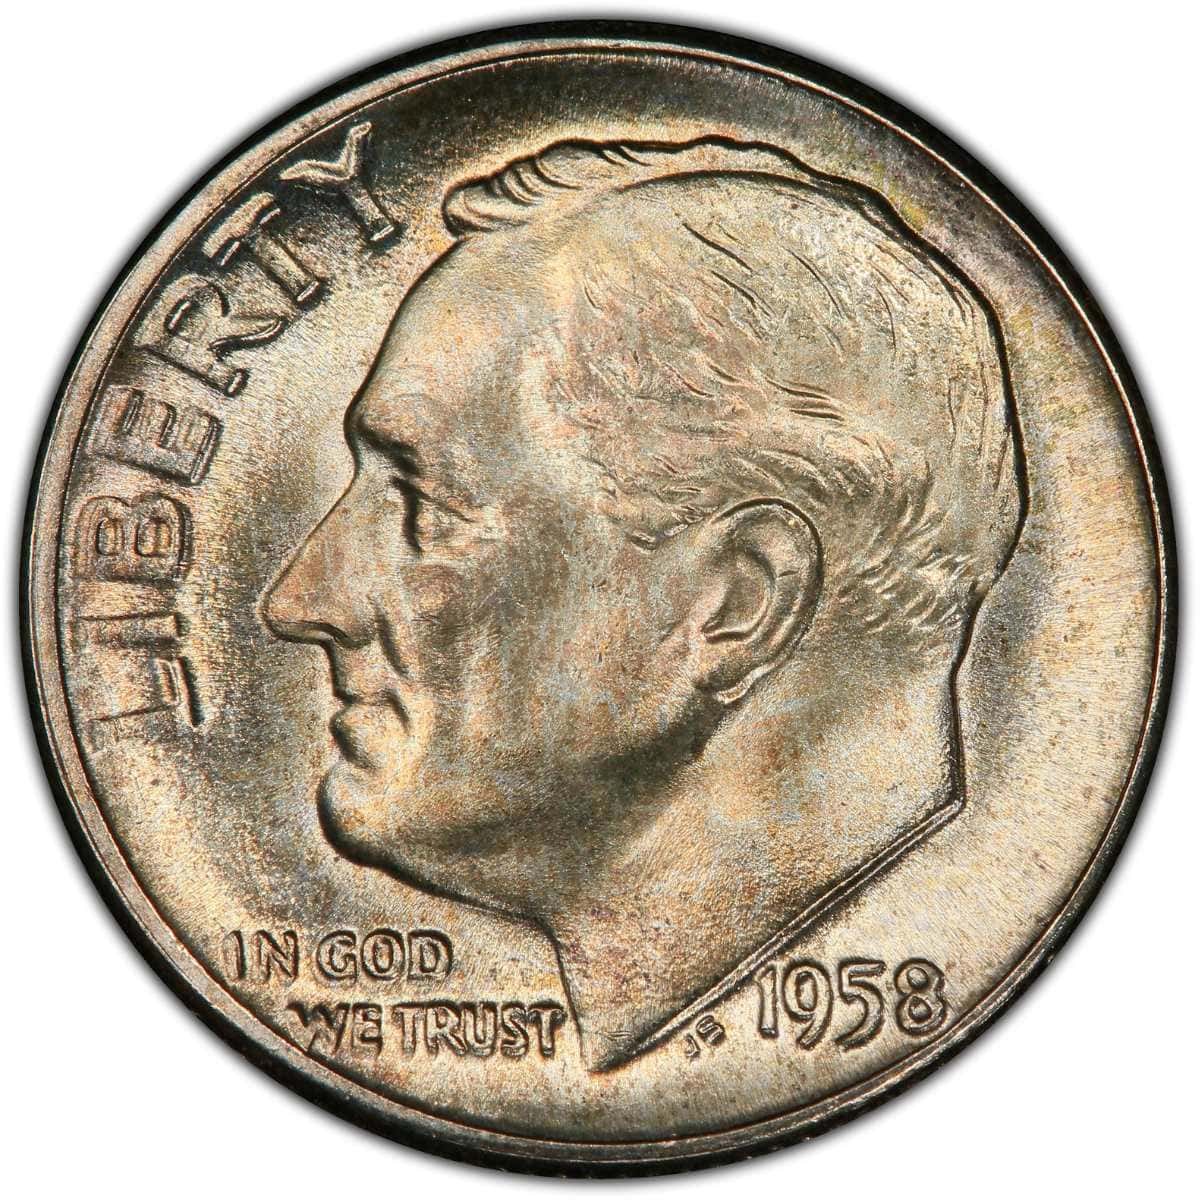 1958 Dime history